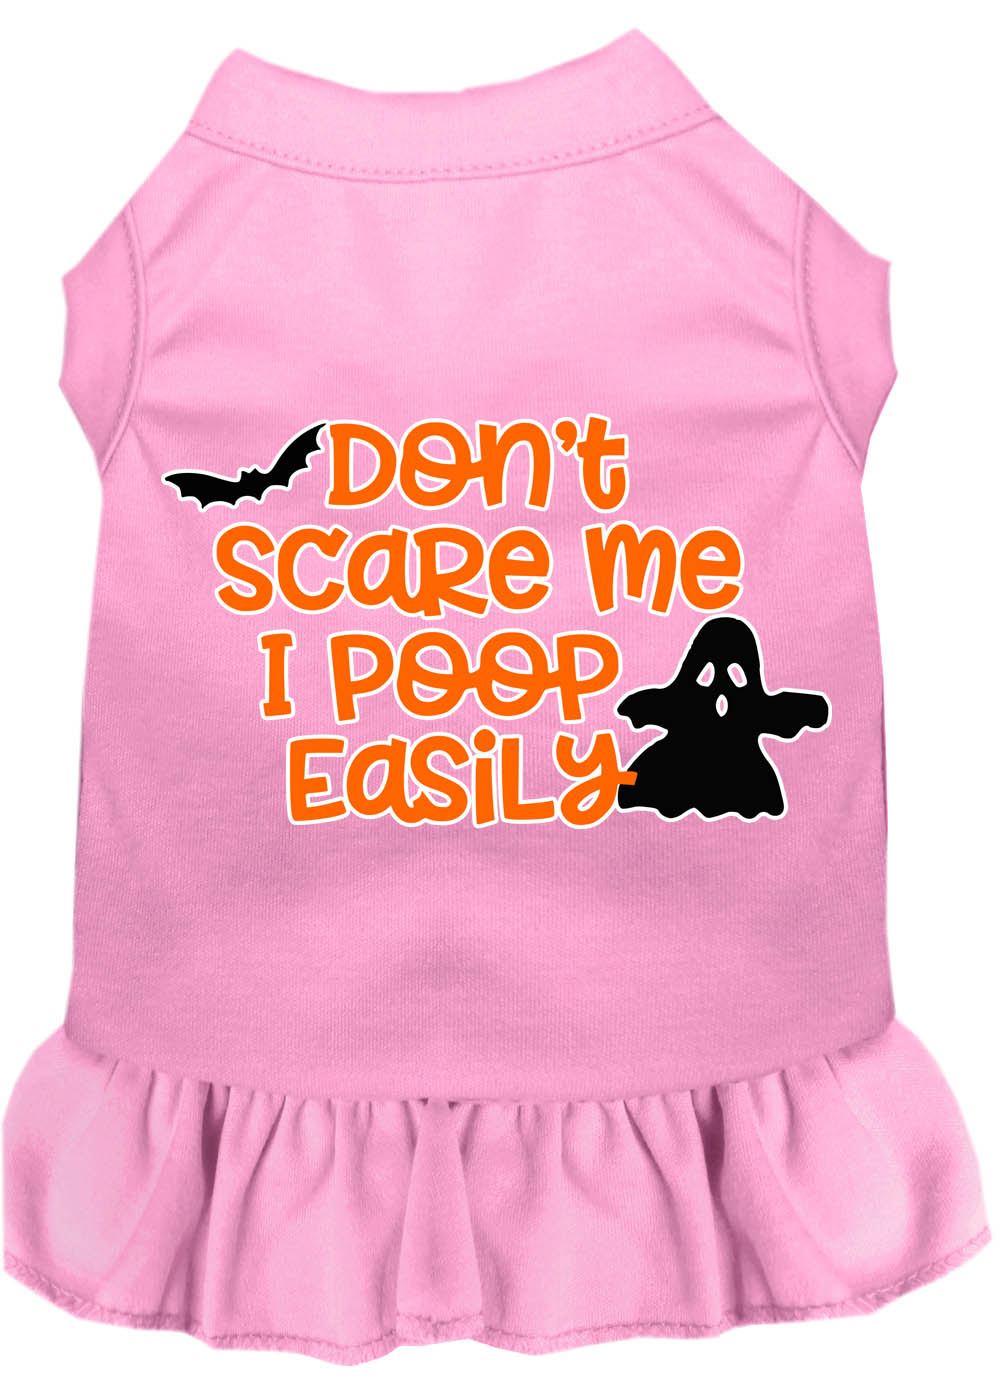 Don't Scare Me, Poops Easily Screen Print Dog Dress Light Pink XXL